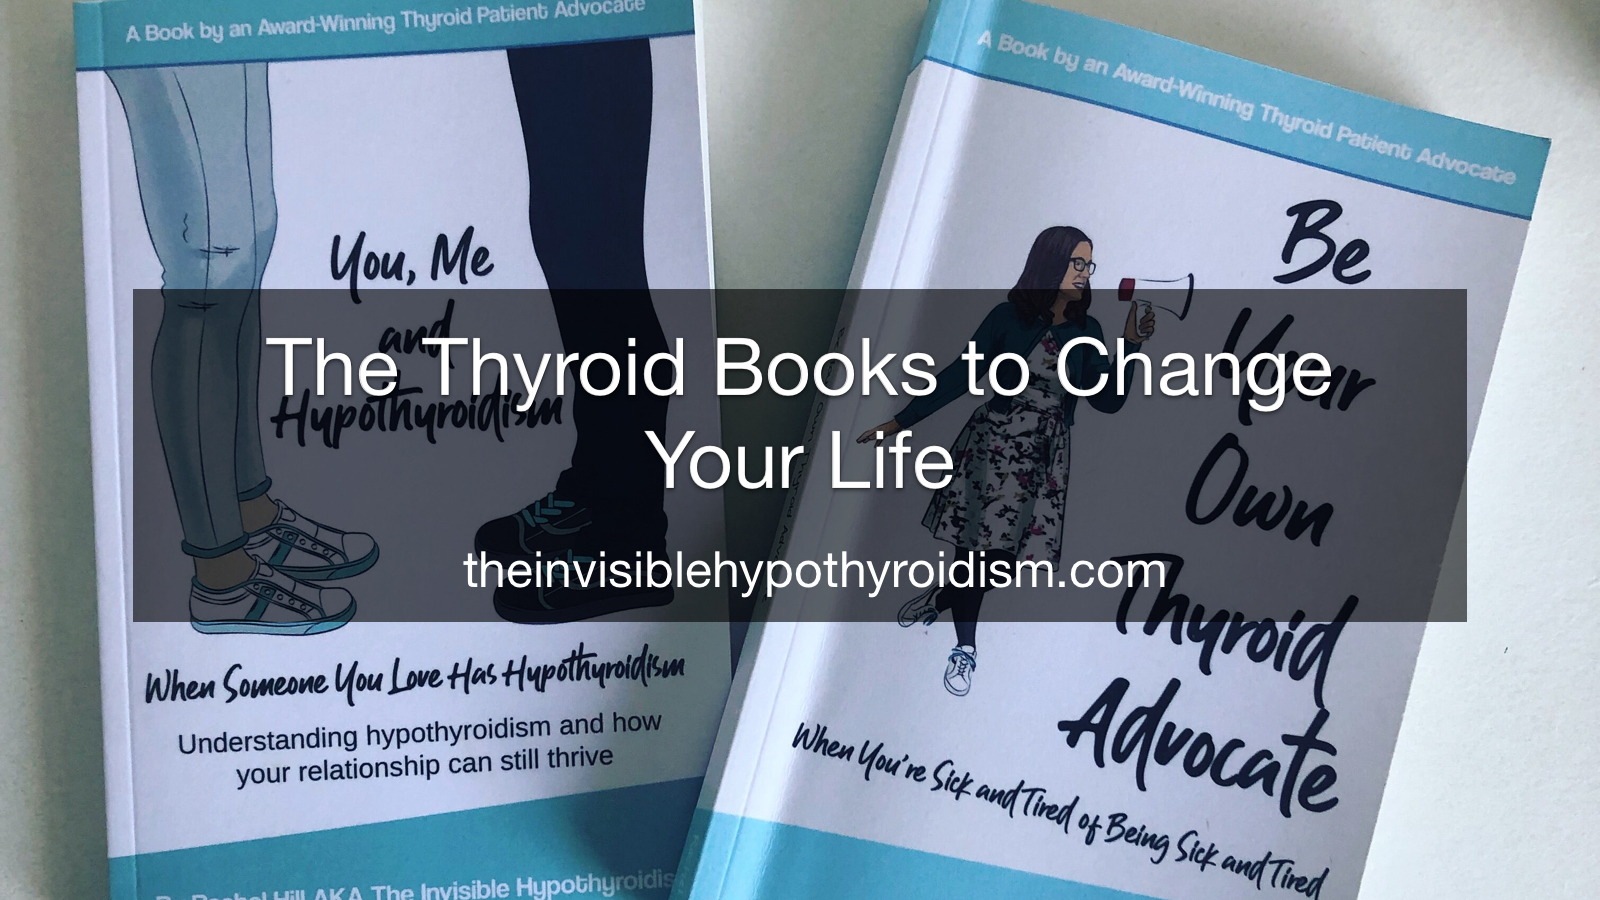 The Thyroid Books to Change Your Life